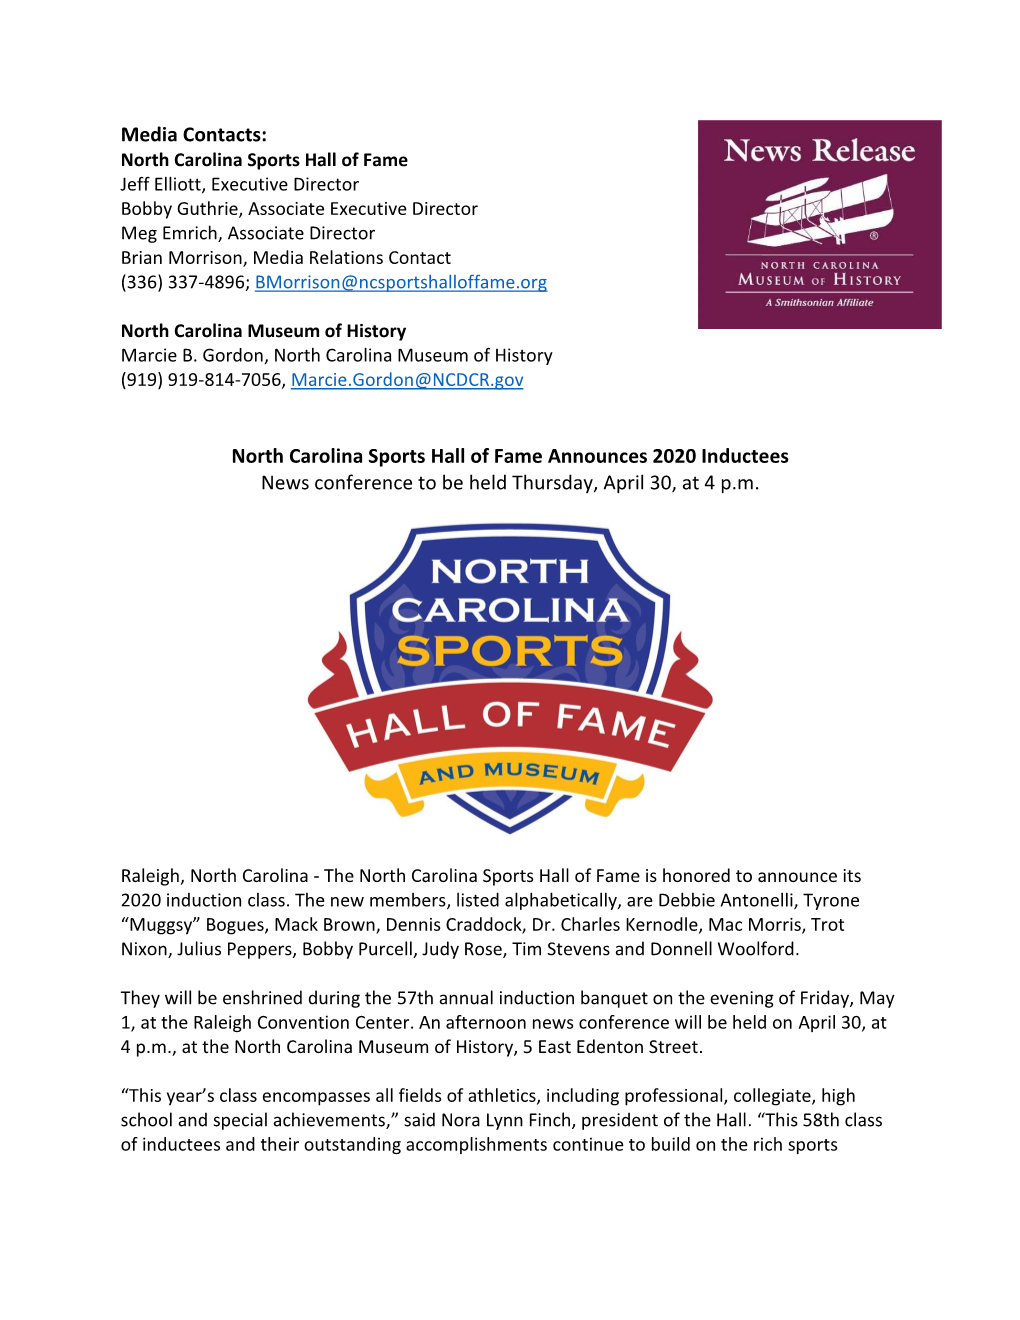 North Carolina Sports Hall of Fame Announces 2020 Inductees News Conference to Be Held Thursday, April 30, at 4 P.M